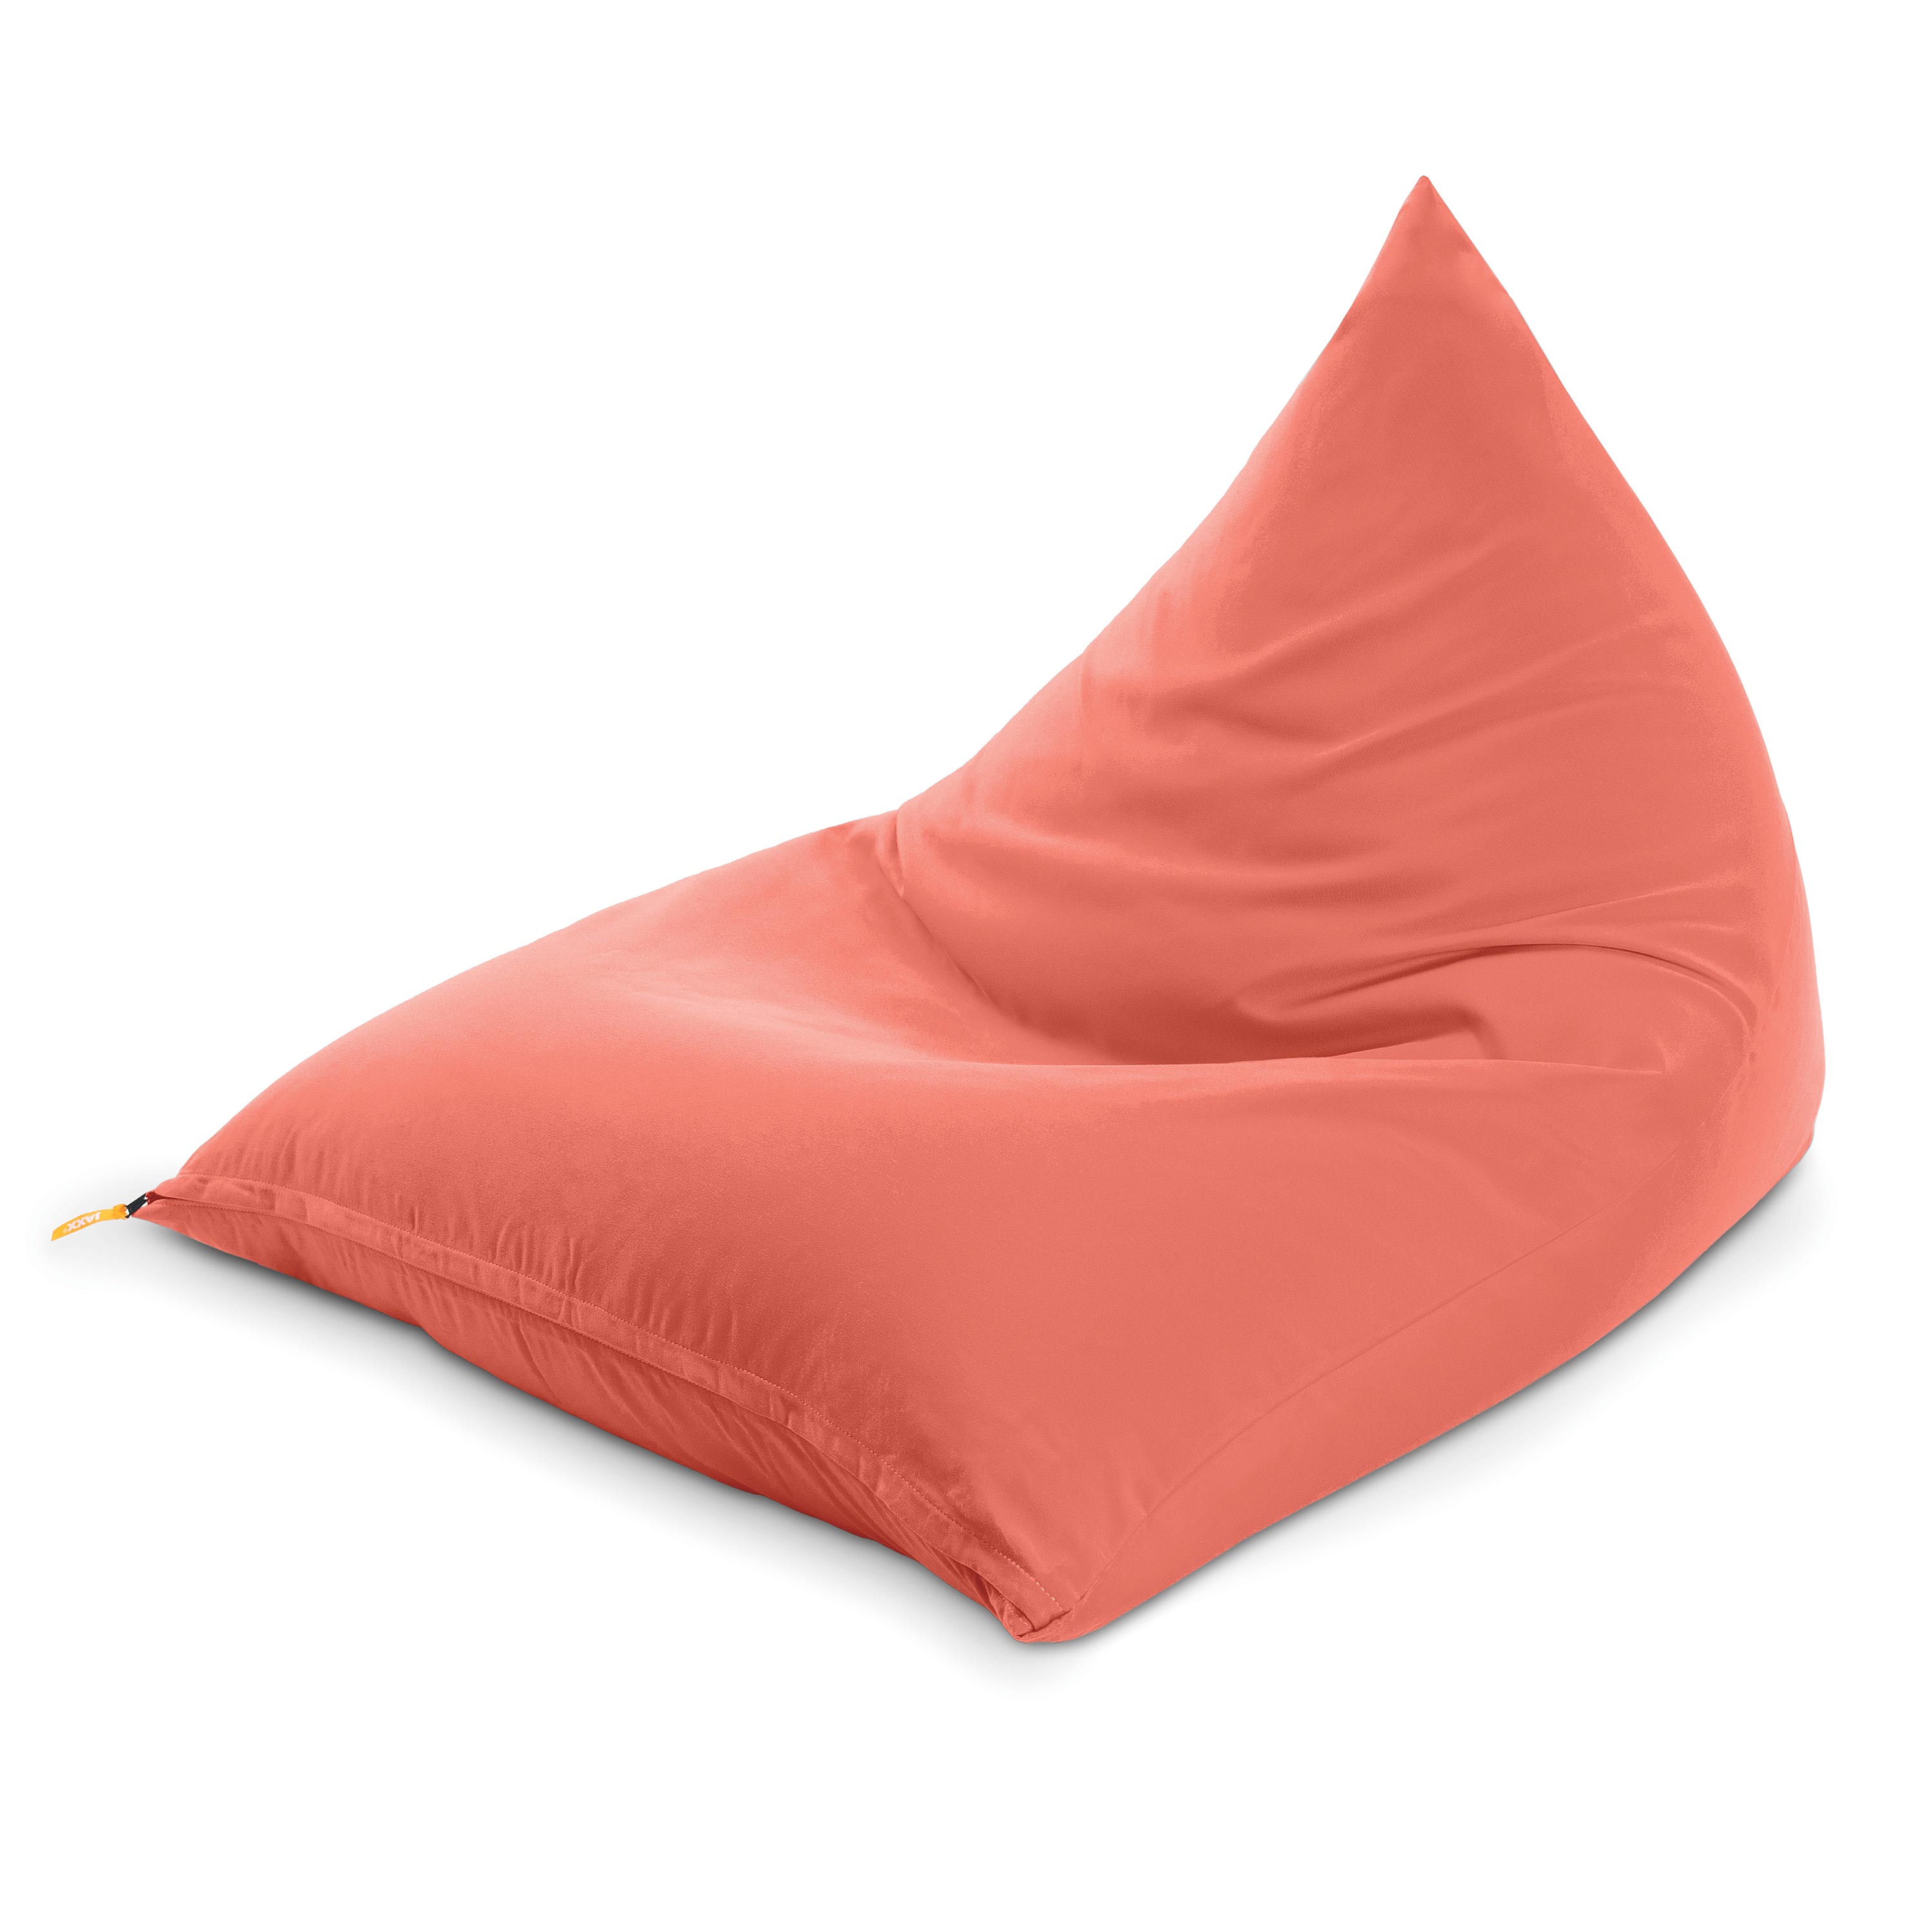 All-Weather Twist Bean Bag Chair swatch image